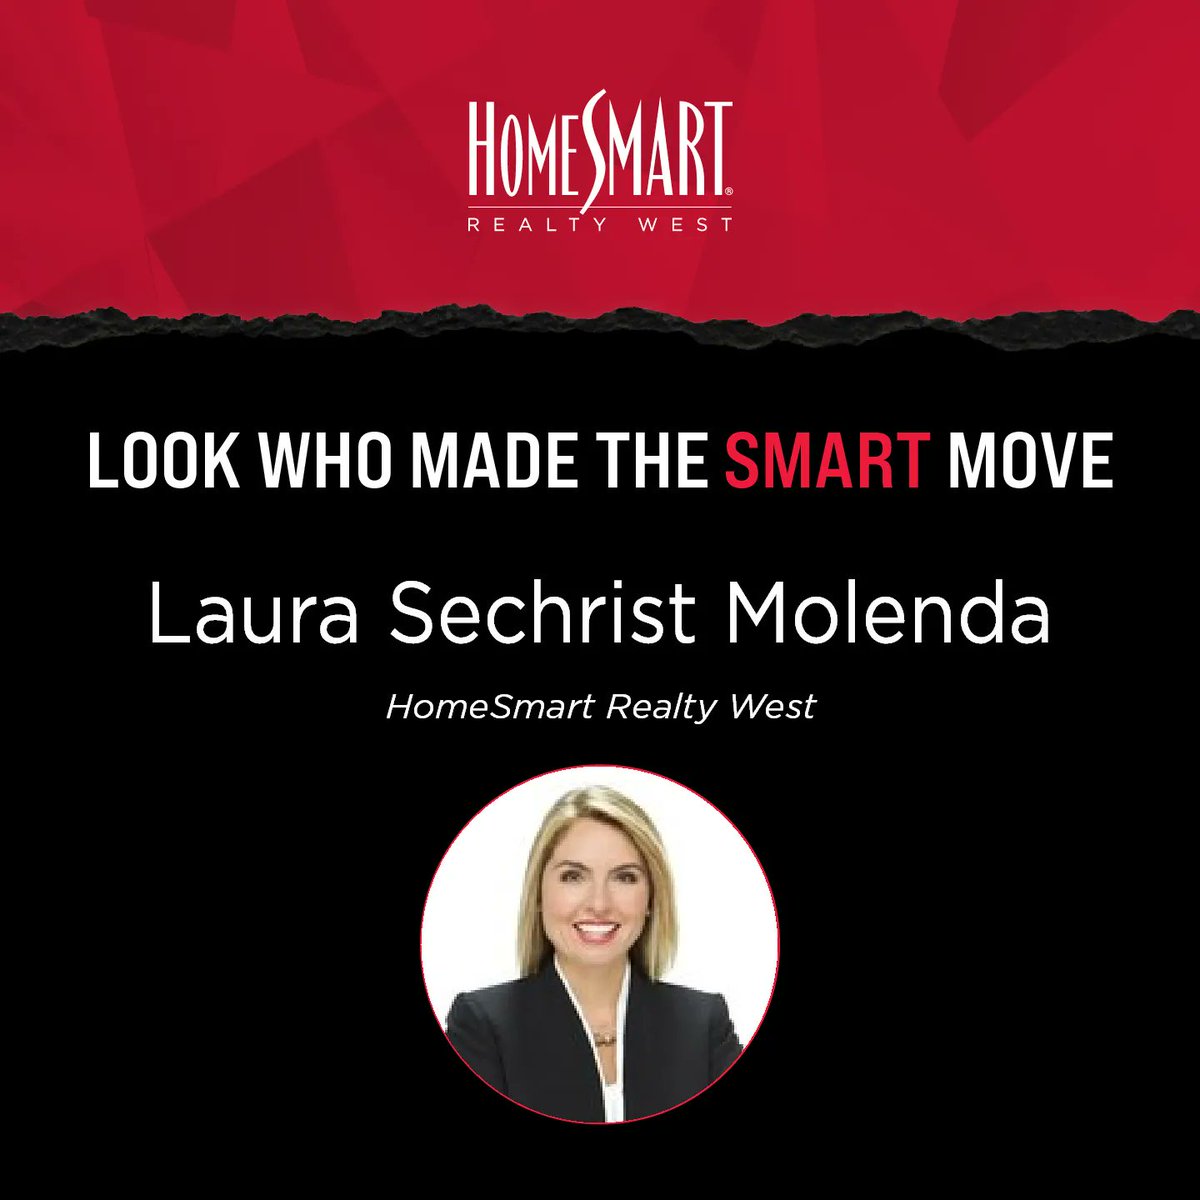 🏡 Welcome to HomeSmart Realty West Laura Sechrist Molenda🌟 We are proud to have you join the HomeSmart family. 💯 #HomeSmartRealtyWest #HomeSmart #SmartMove #SanDiegoRealEstate